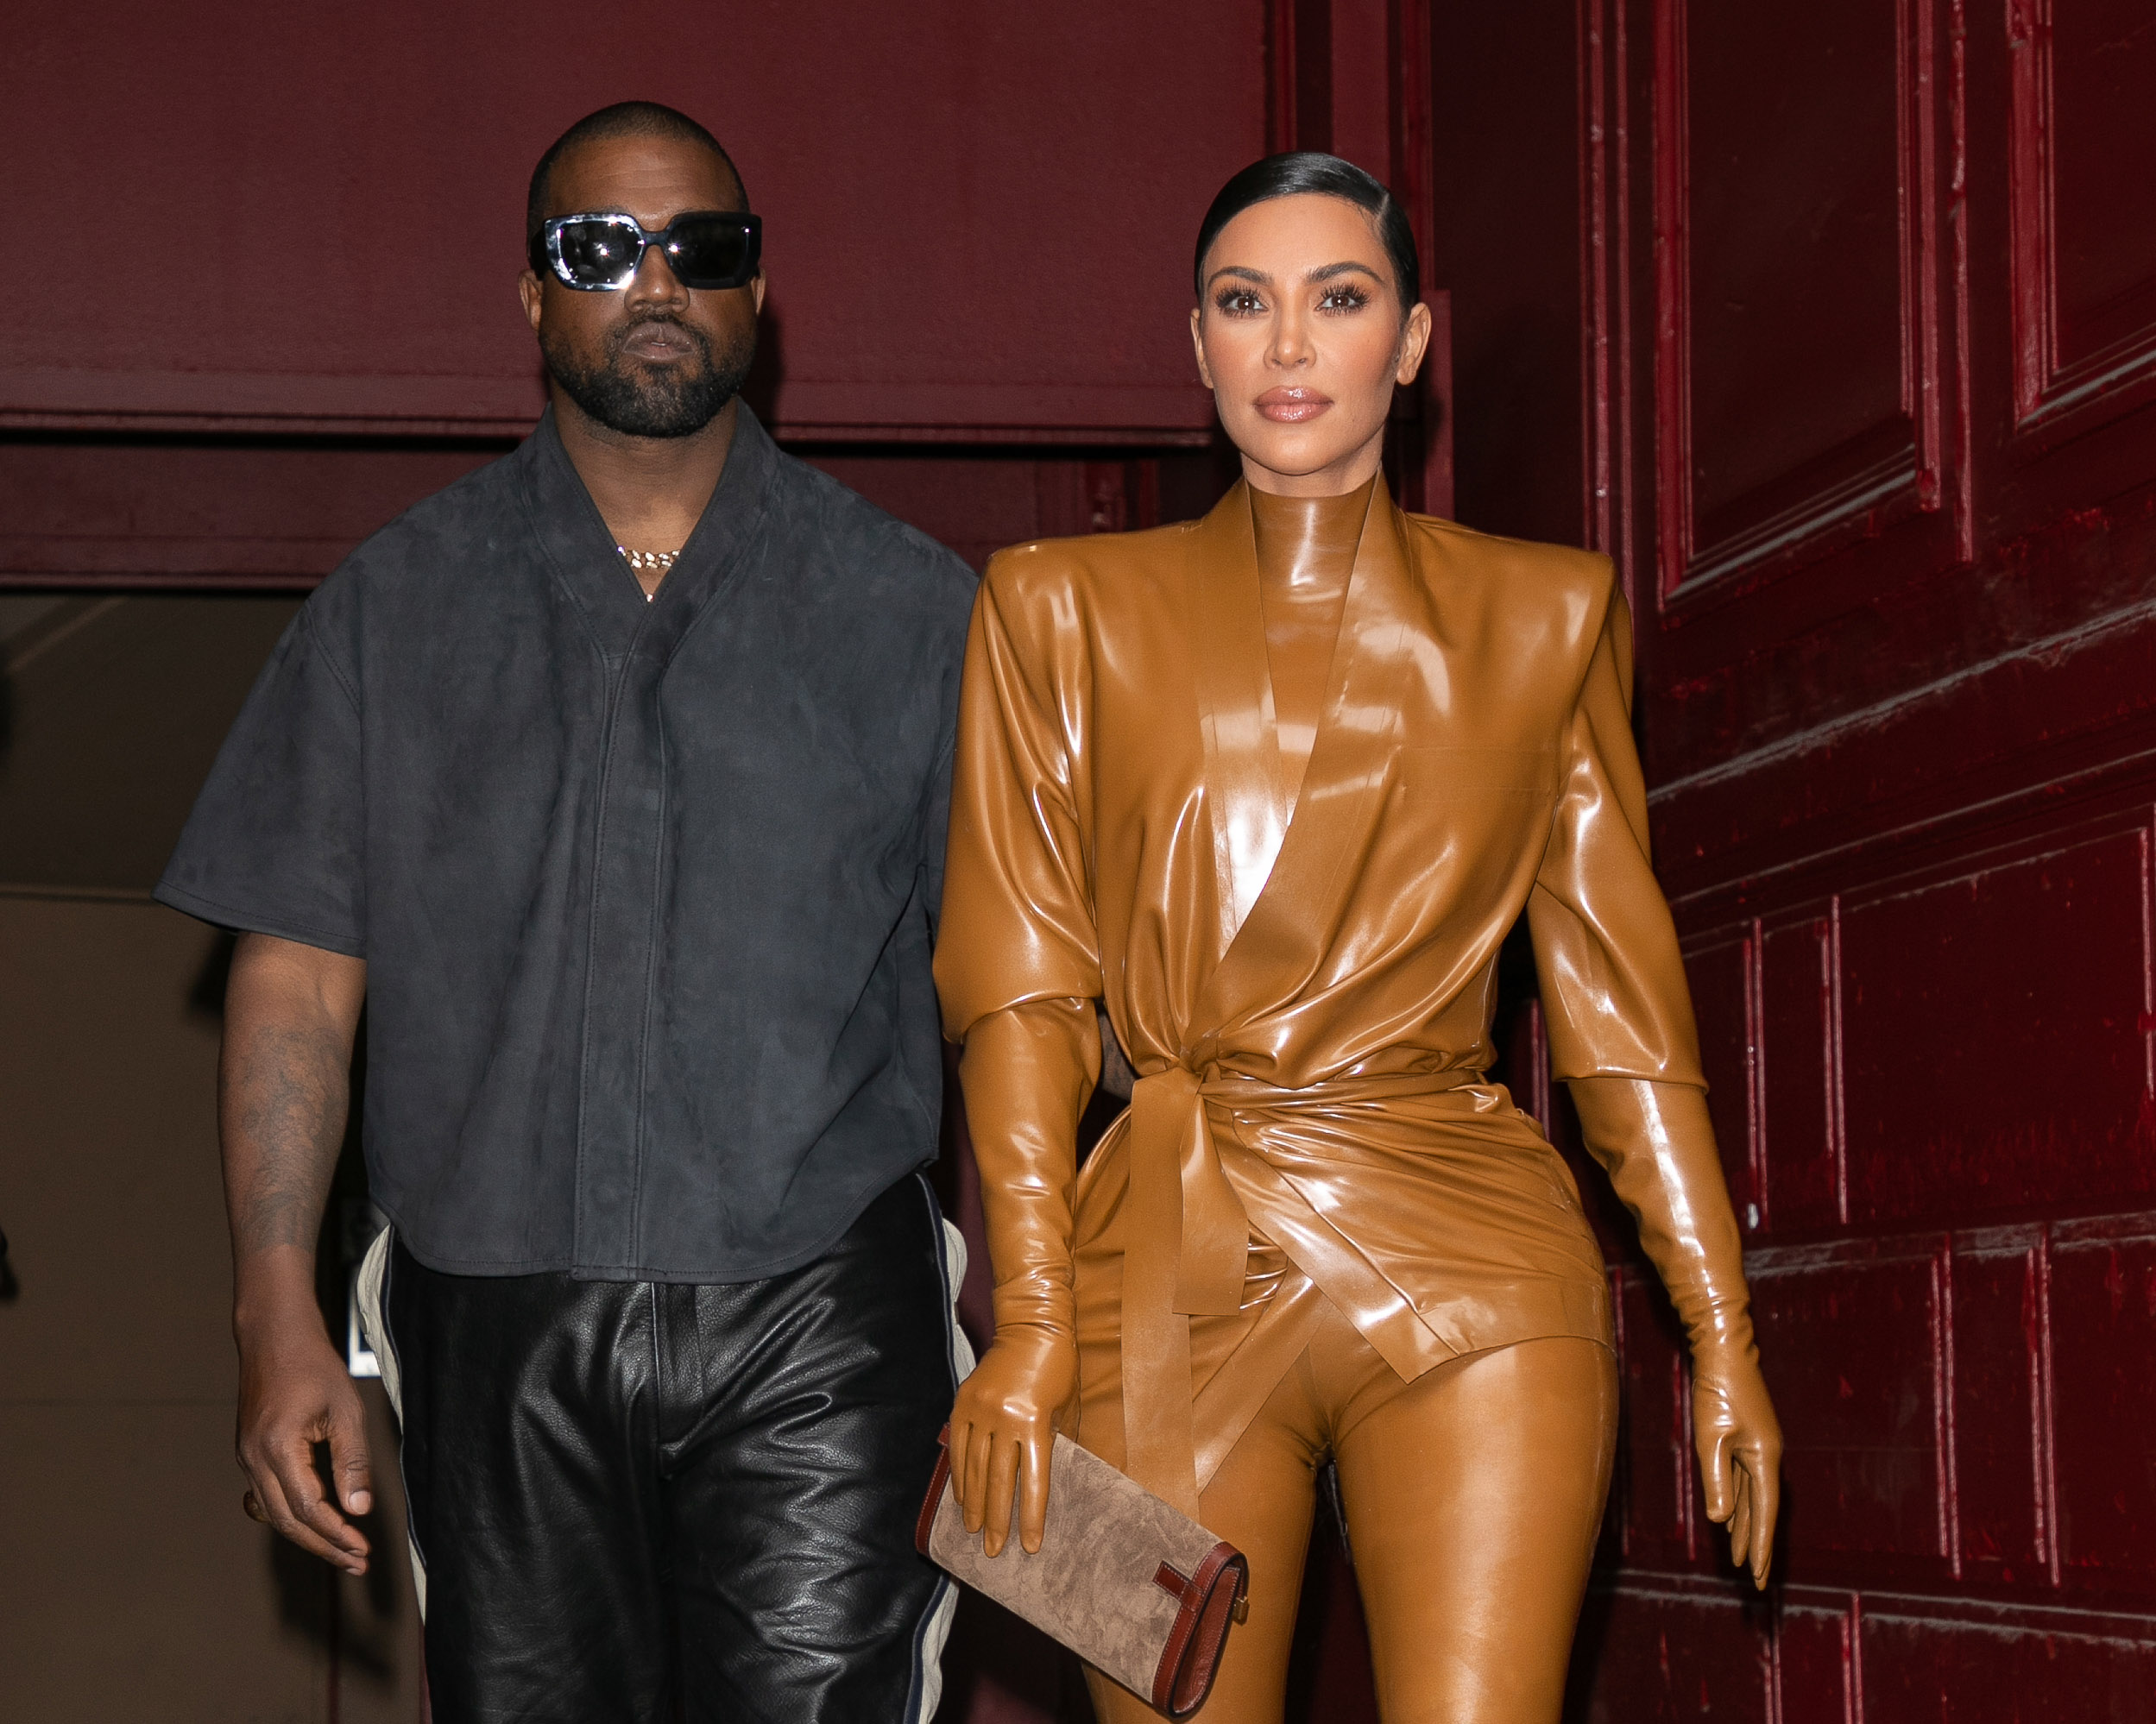 Kim and Kanye divorced in 2022, after getting married in 2014